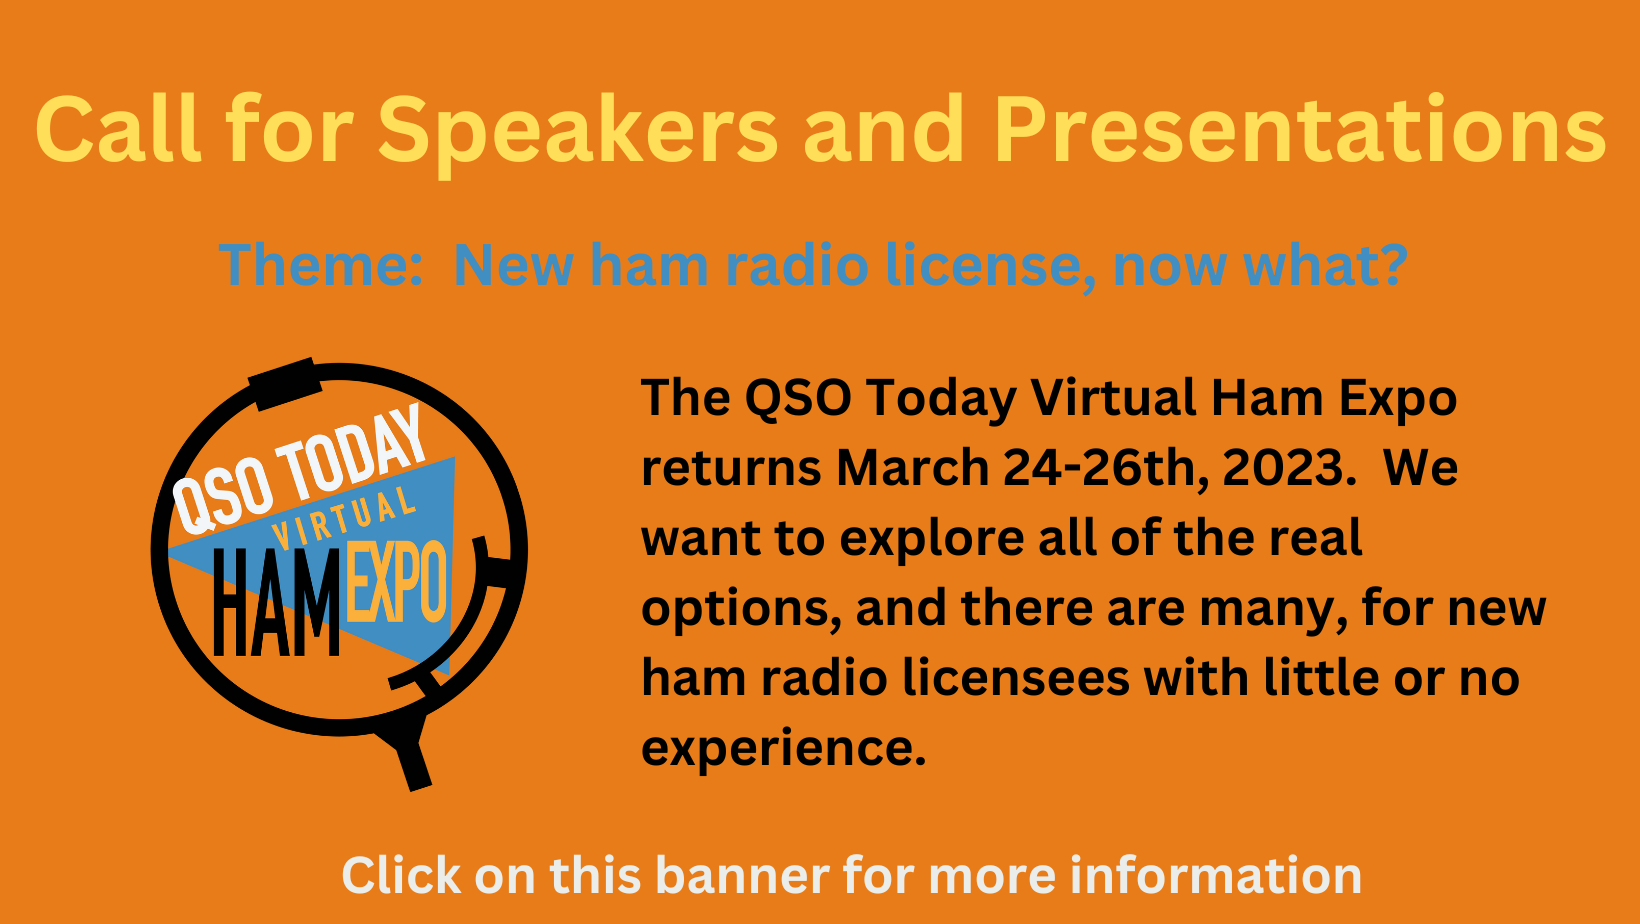 Call for Speakers and Presentations for the Next QSO Today Virtual Ham Expo in March 2023